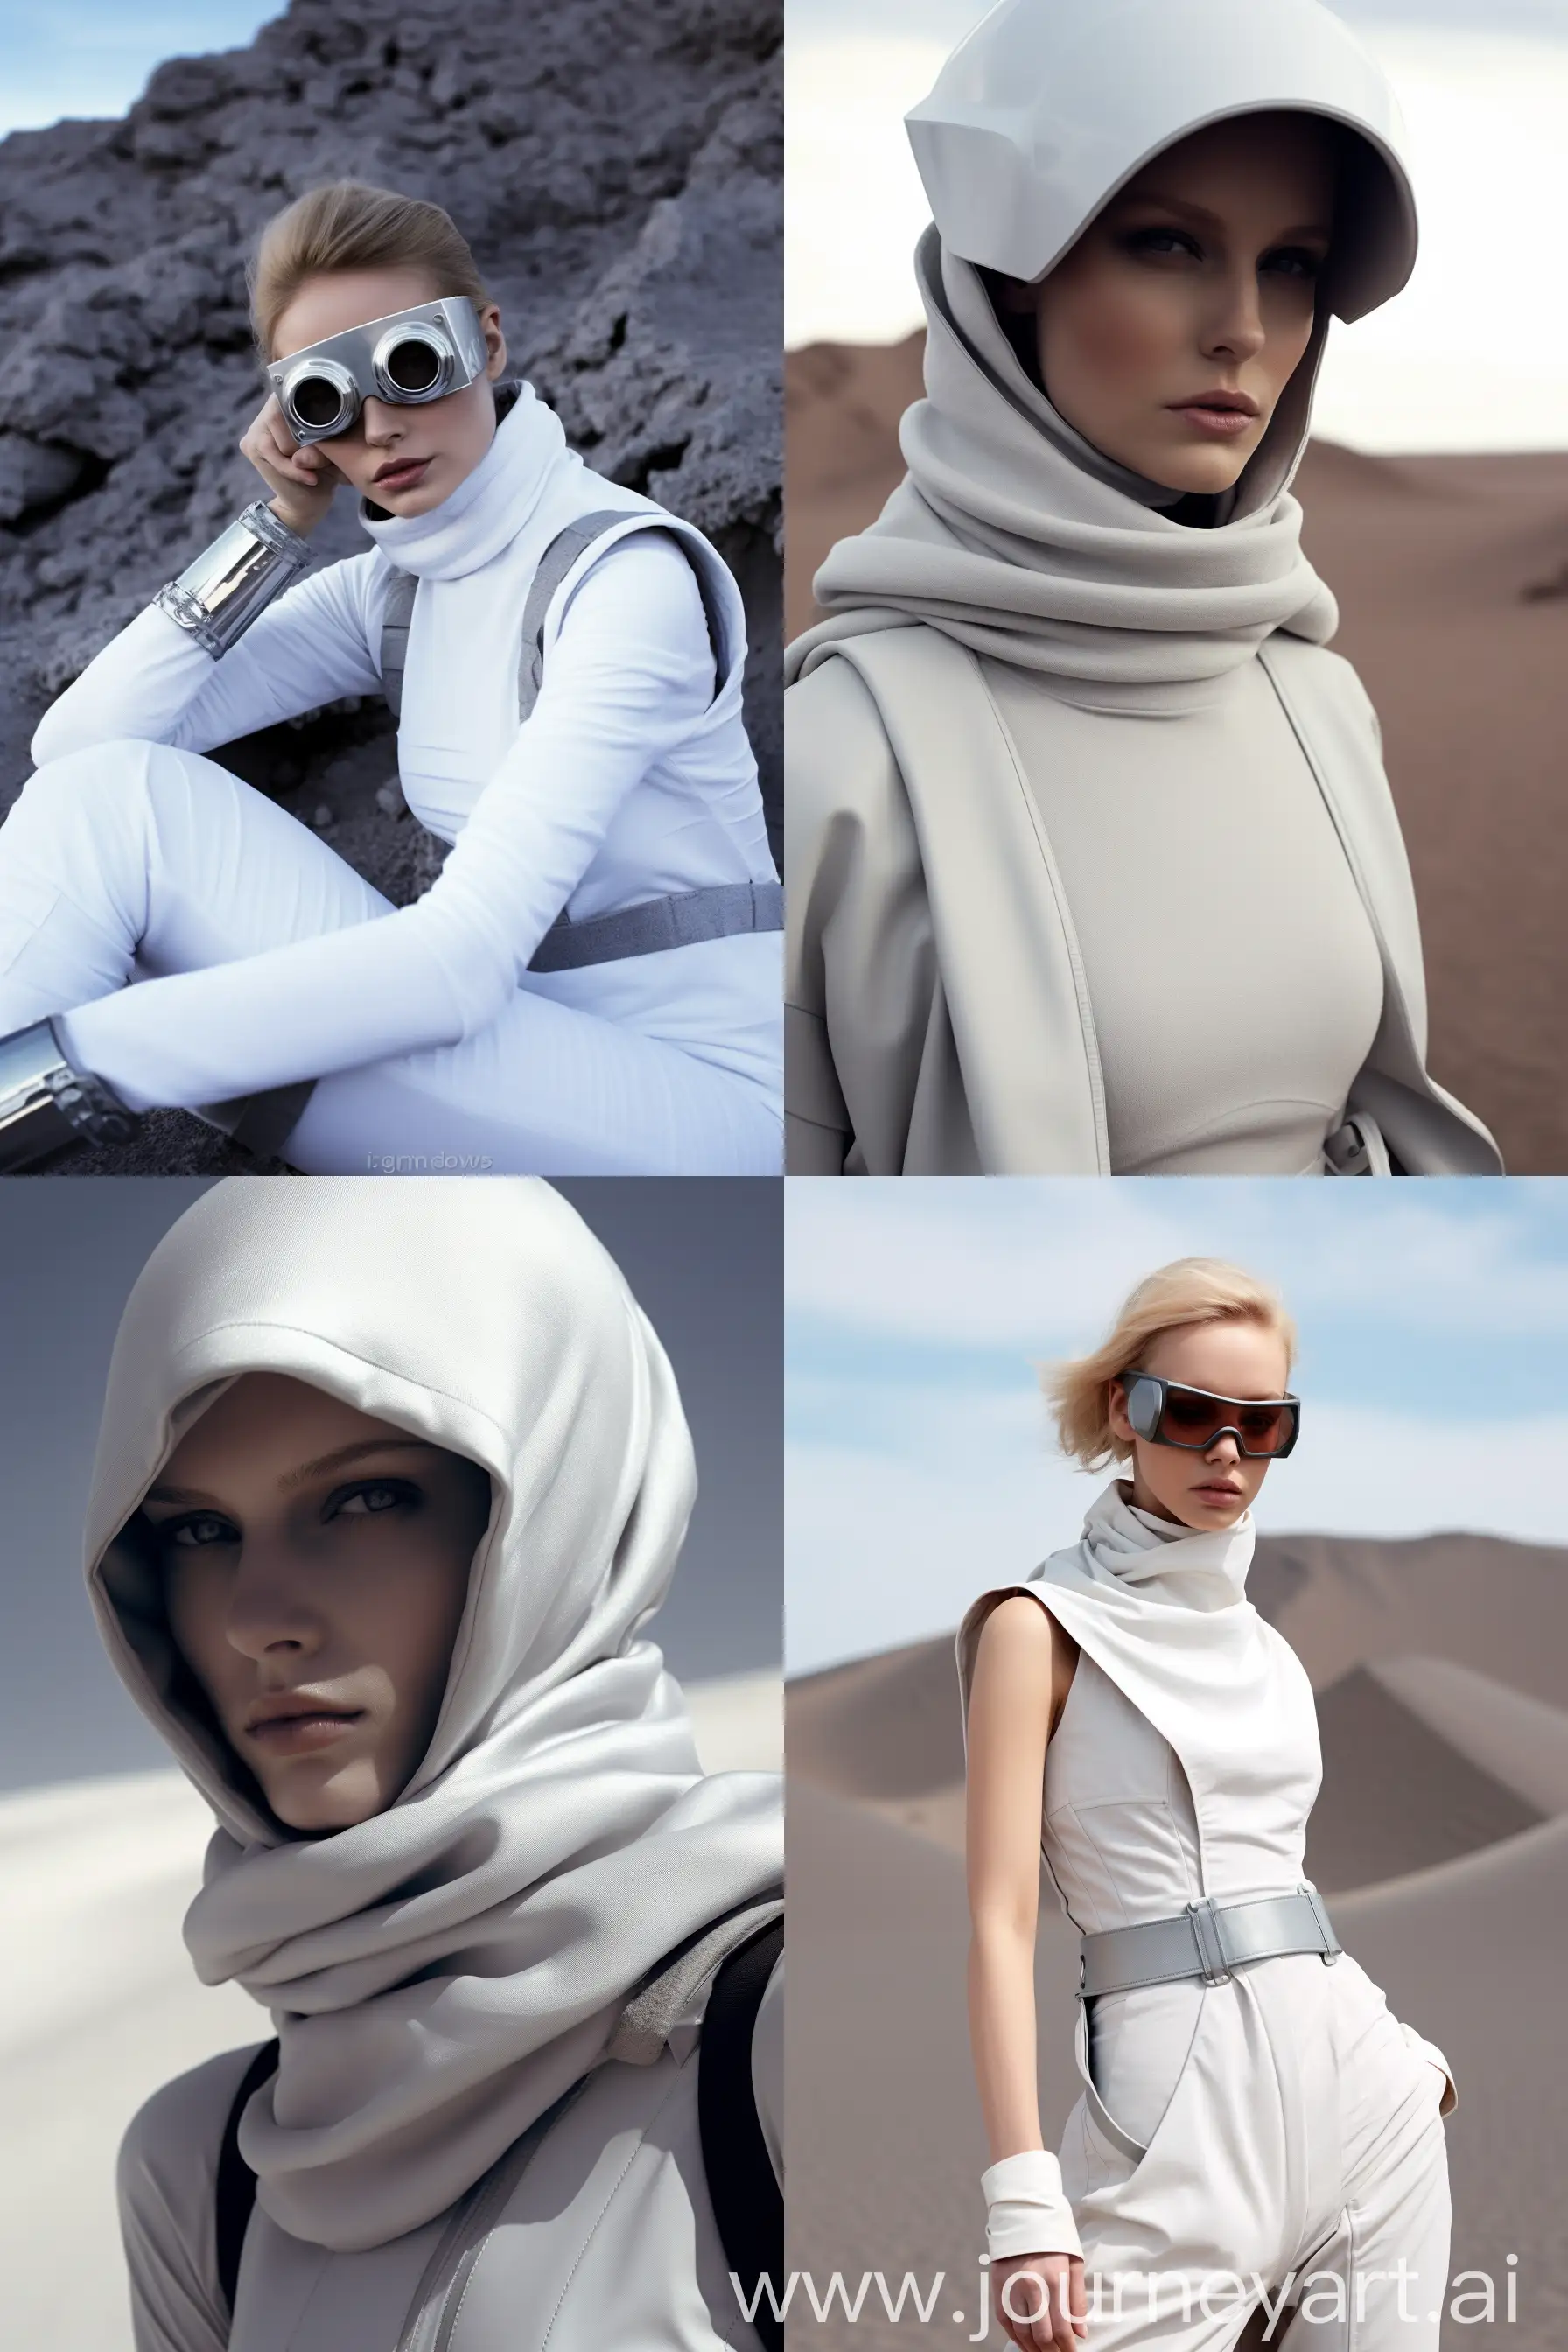 Futuristic-Fashion-Photoshoot-on-Mars-with-White-Woman-in-Dark-Grey-Outfit